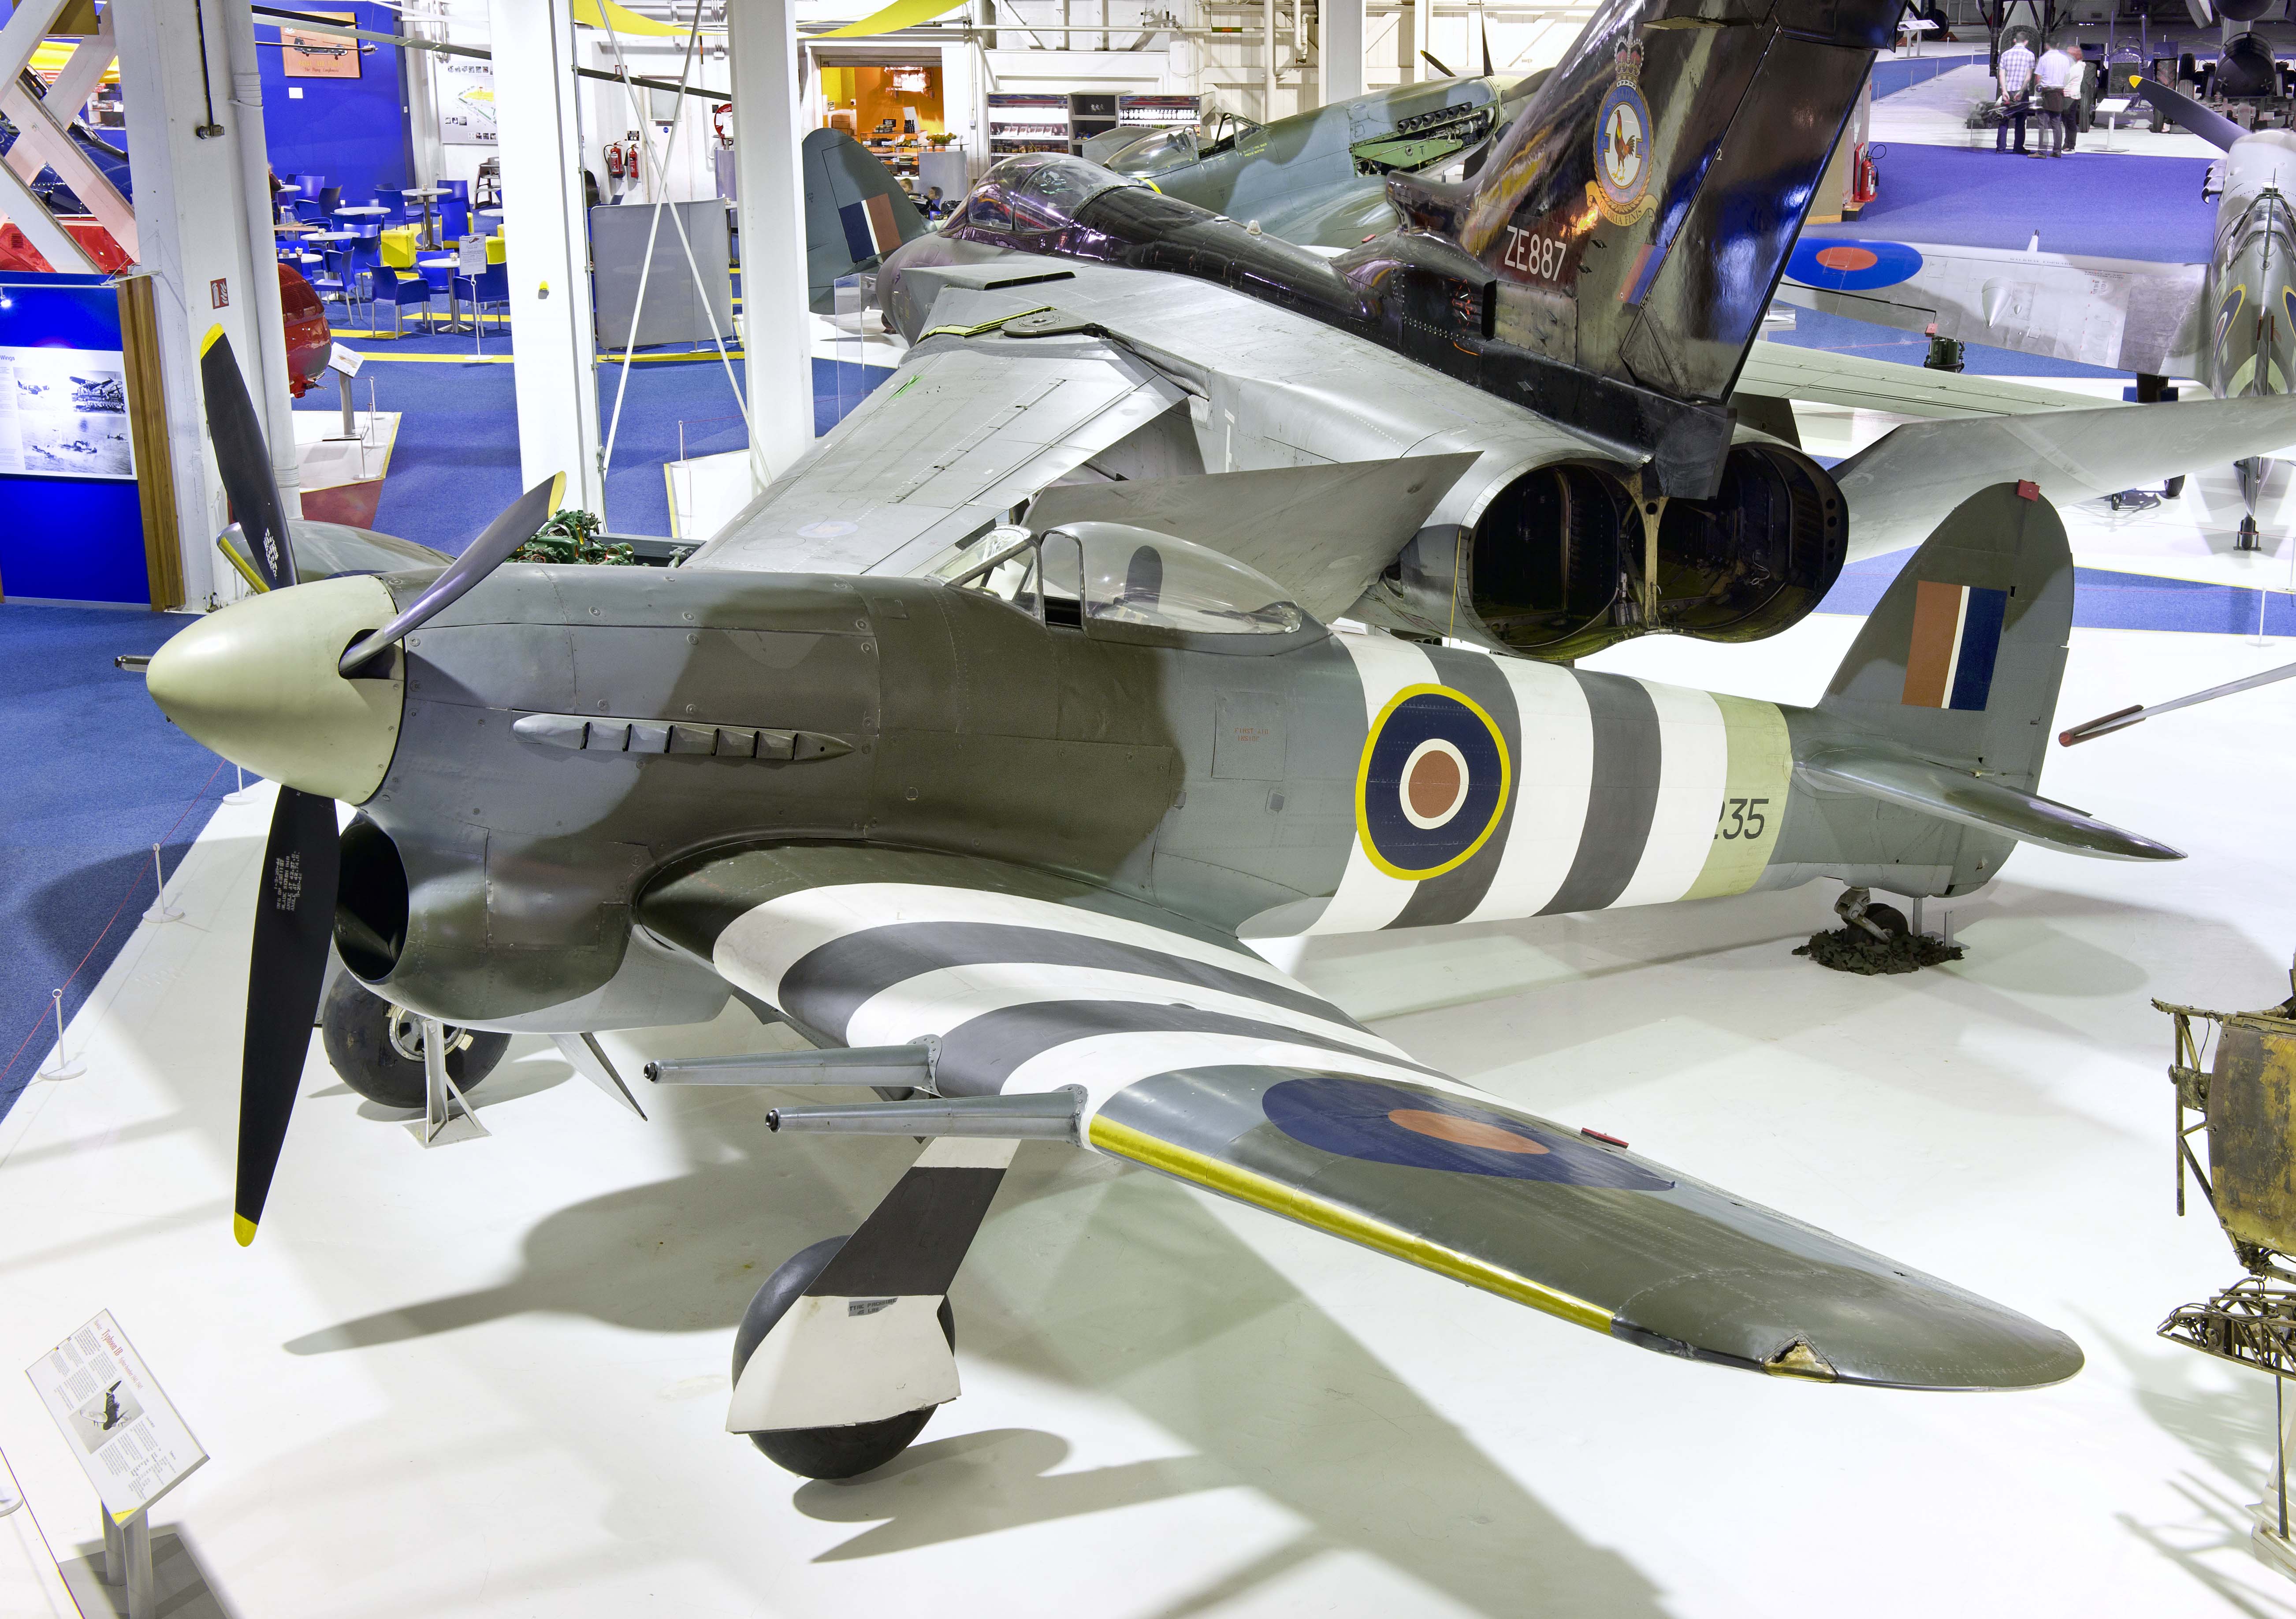 Hawker Typhoon IB, MN235 on display at RAF Museum Hendon, where she has resided for many years. The "Tiffie" will soon be on her way to Canada, where she will go on display at the Canada Aviation & Space Museum in Ottawa, Ontario. (photo via RAF Museum)